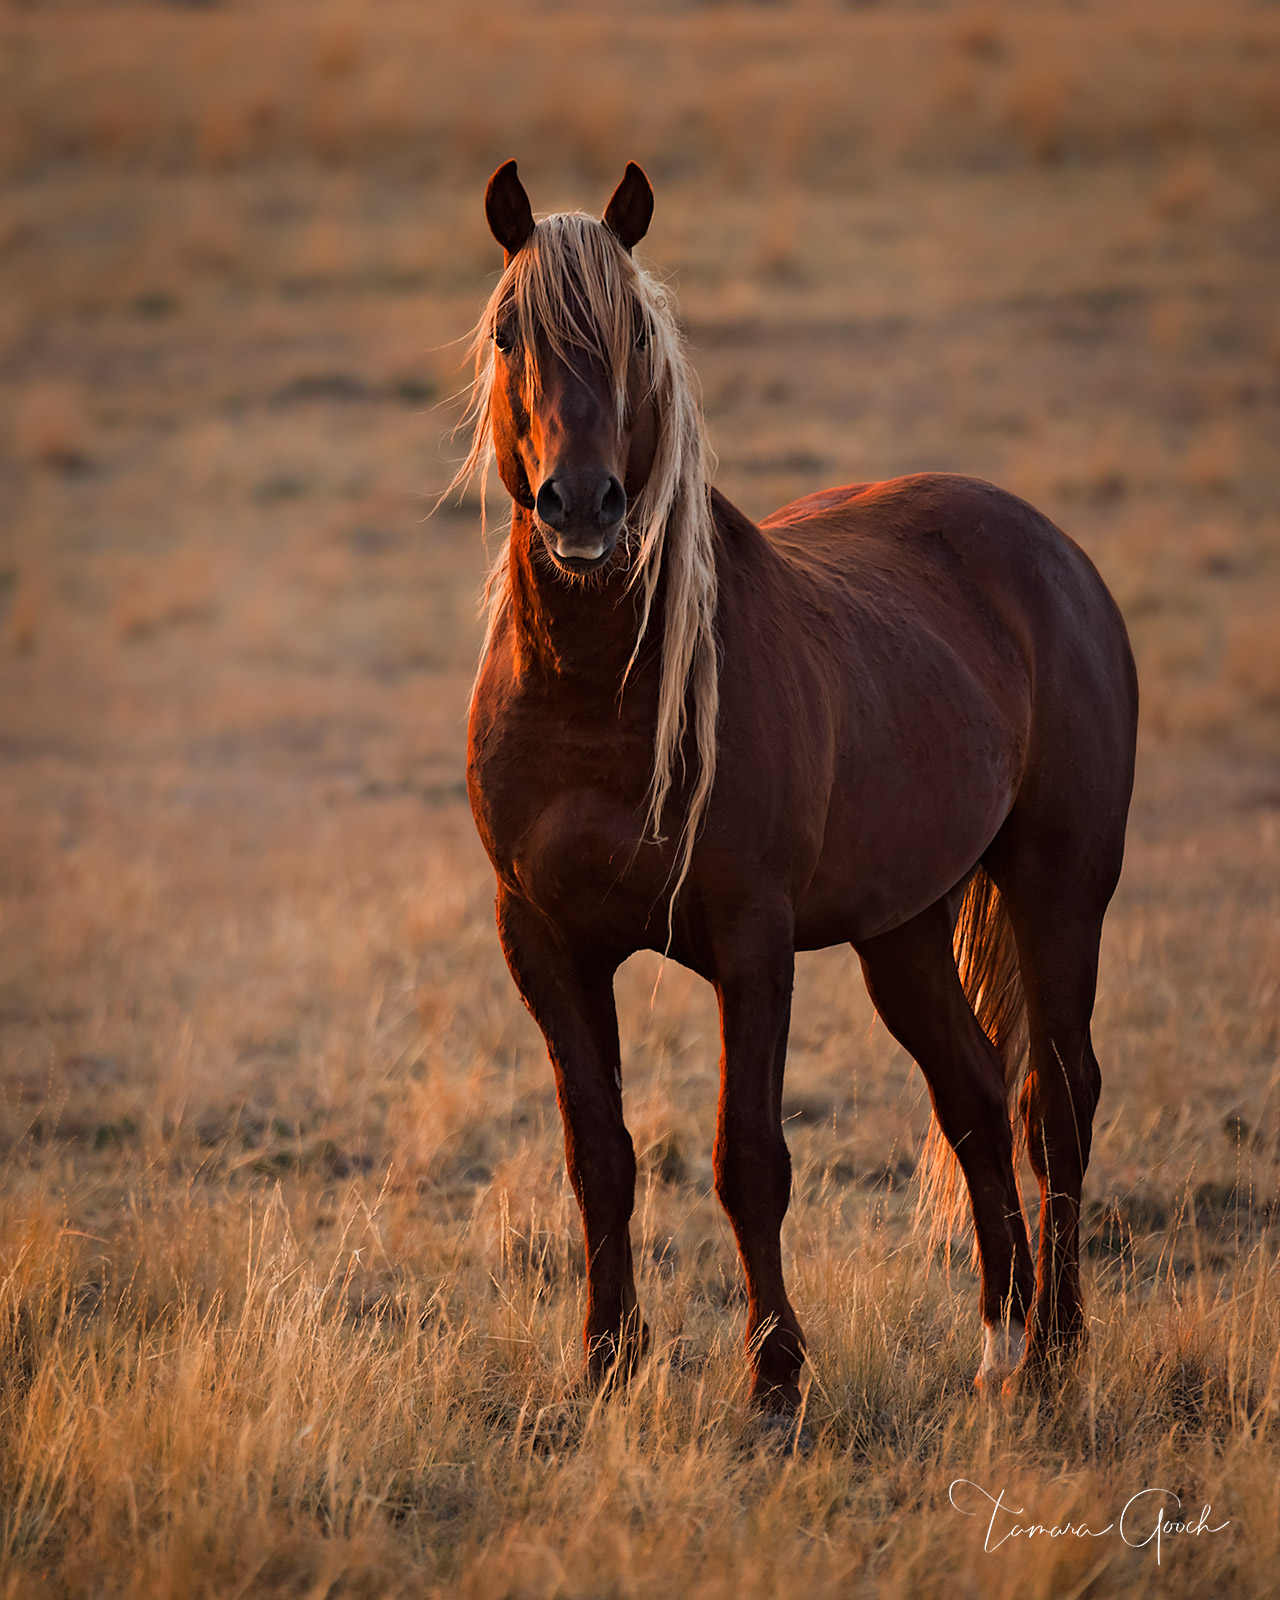 Limited Edition Print of 50 The fine art print "Wild Horse Golden Hour" is shown here as a 56 x72 inch non-glare acrylic print...